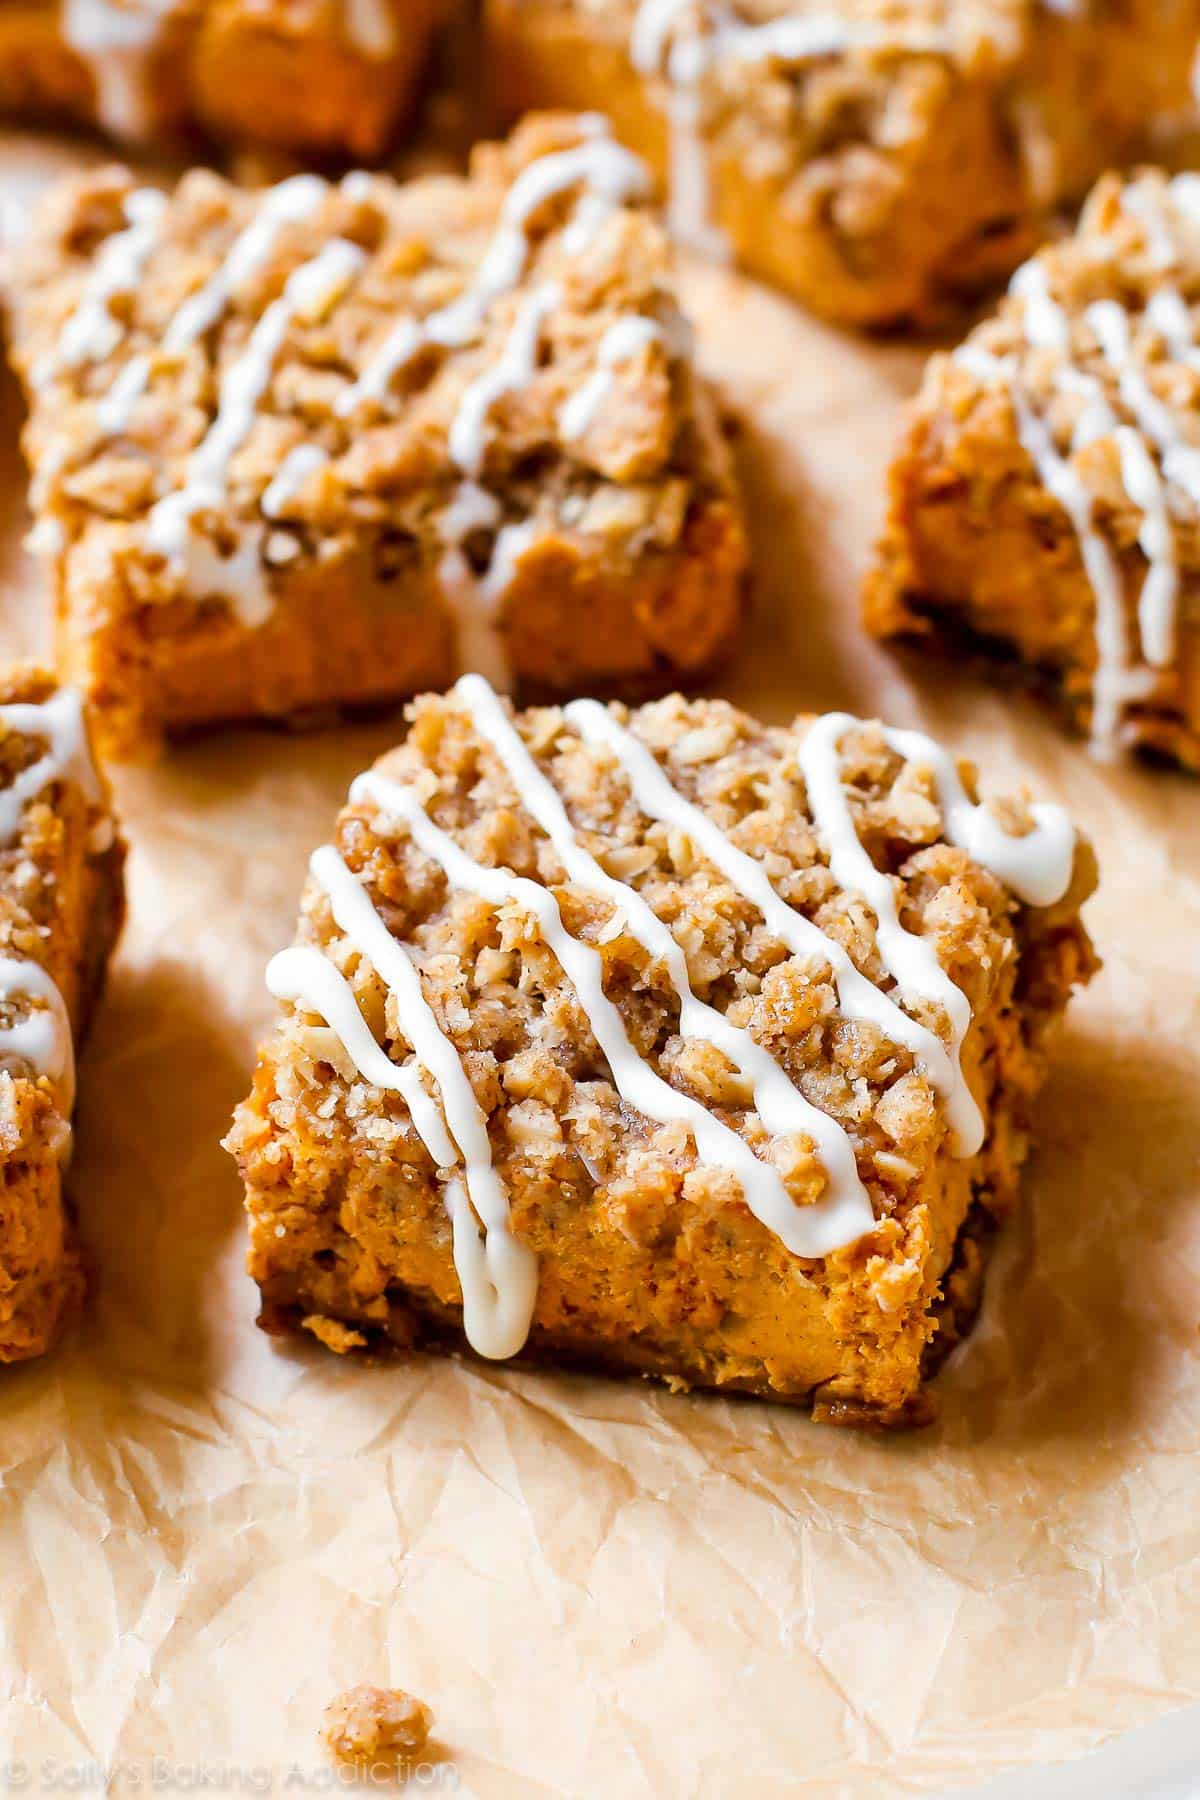 Instead of pumpkin pie this season, try my pumpkin streusel bars. With a gingersnap crust and brown sugar streusel topping, everyone will want seconds! sallysbakingaddiction.com